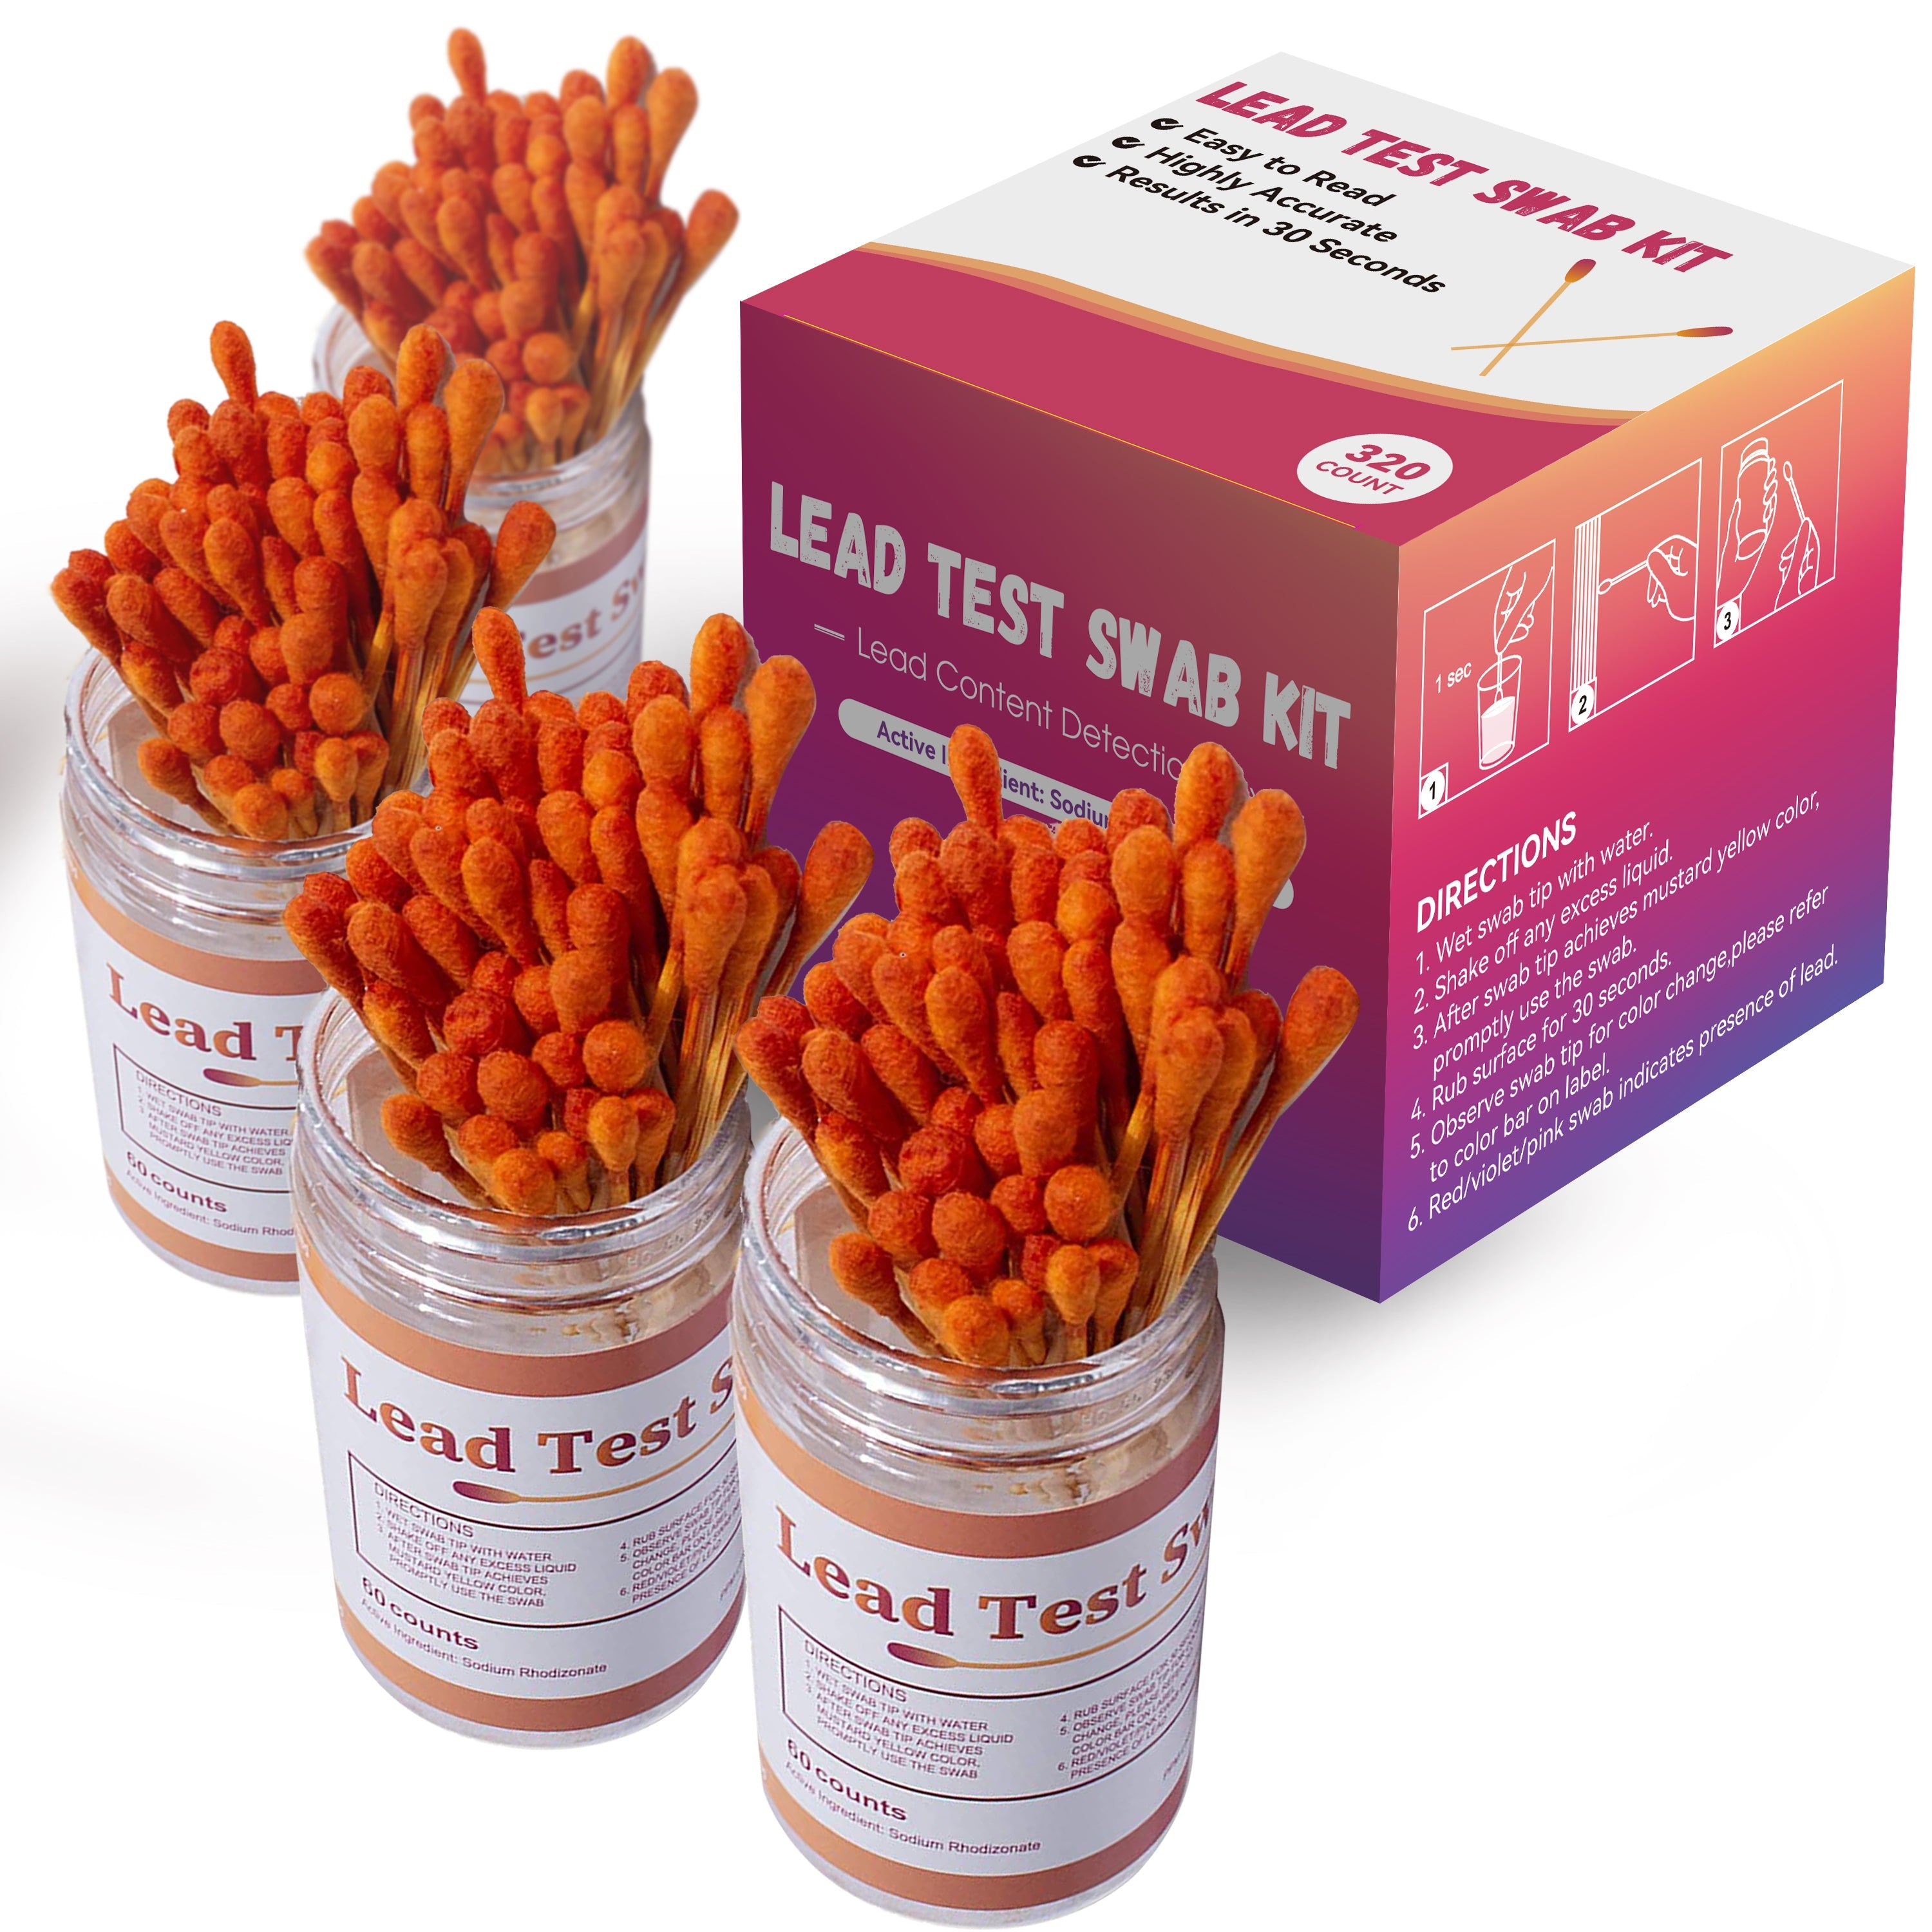 Residential Lead Detection Instant Lead Test Swab Kit Home Lead Testing (80X4=320 Pcs Rapid Home Testing Swabs) 30-Second Results. Dip in White Vinegar. Home Use for All Surfaces - Painted, Dishes, Toys, Jewelry, Metal, Ceramics, Wood (LS320)